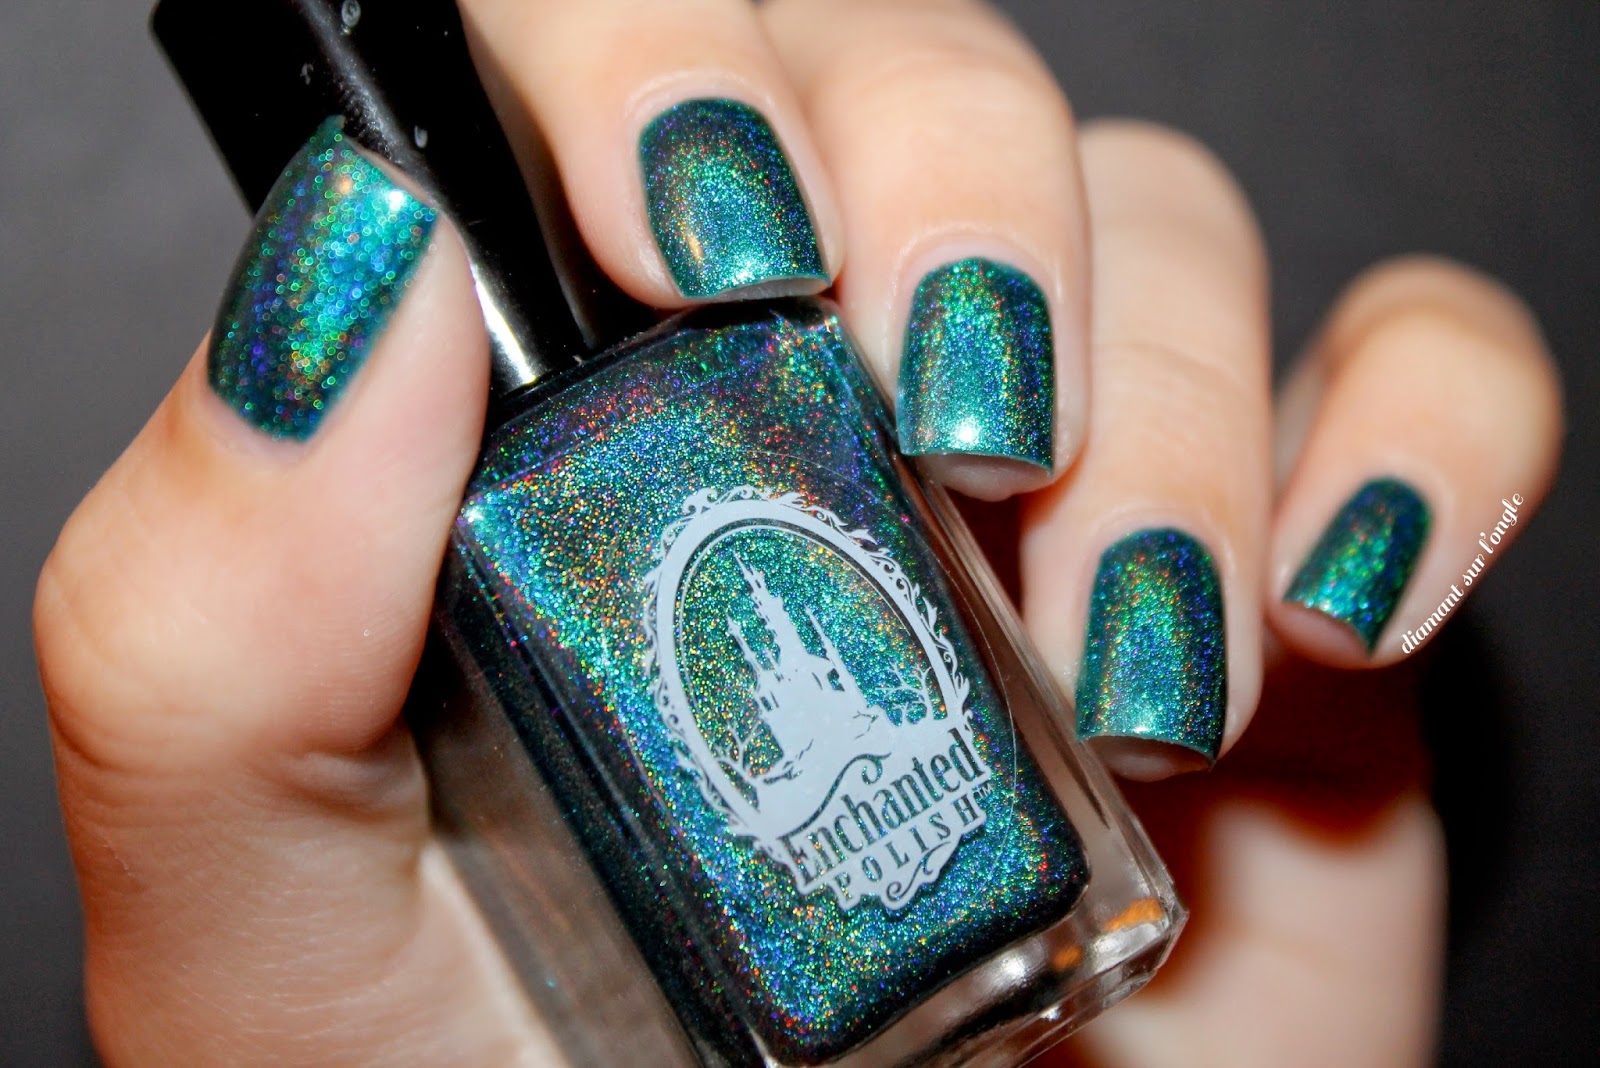 Swatch of the nail polish "Scintealliant" by Enchanted Polish ft. Pshiiit